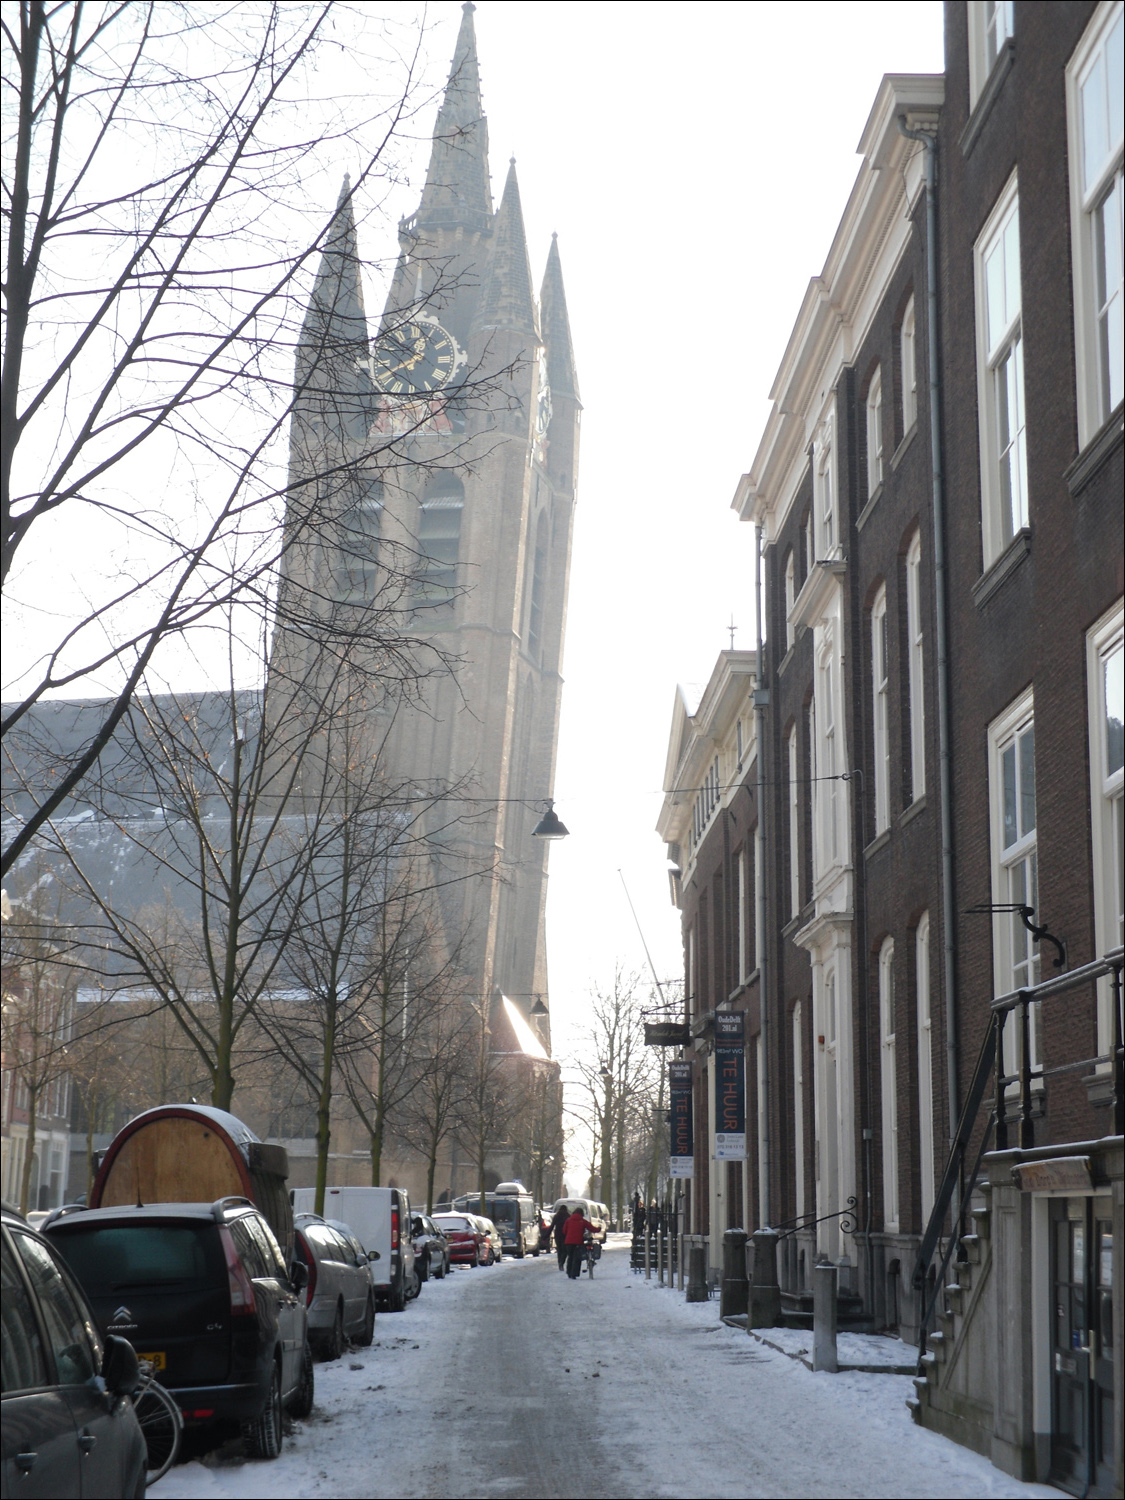 The leaning tower of Oude Kerk